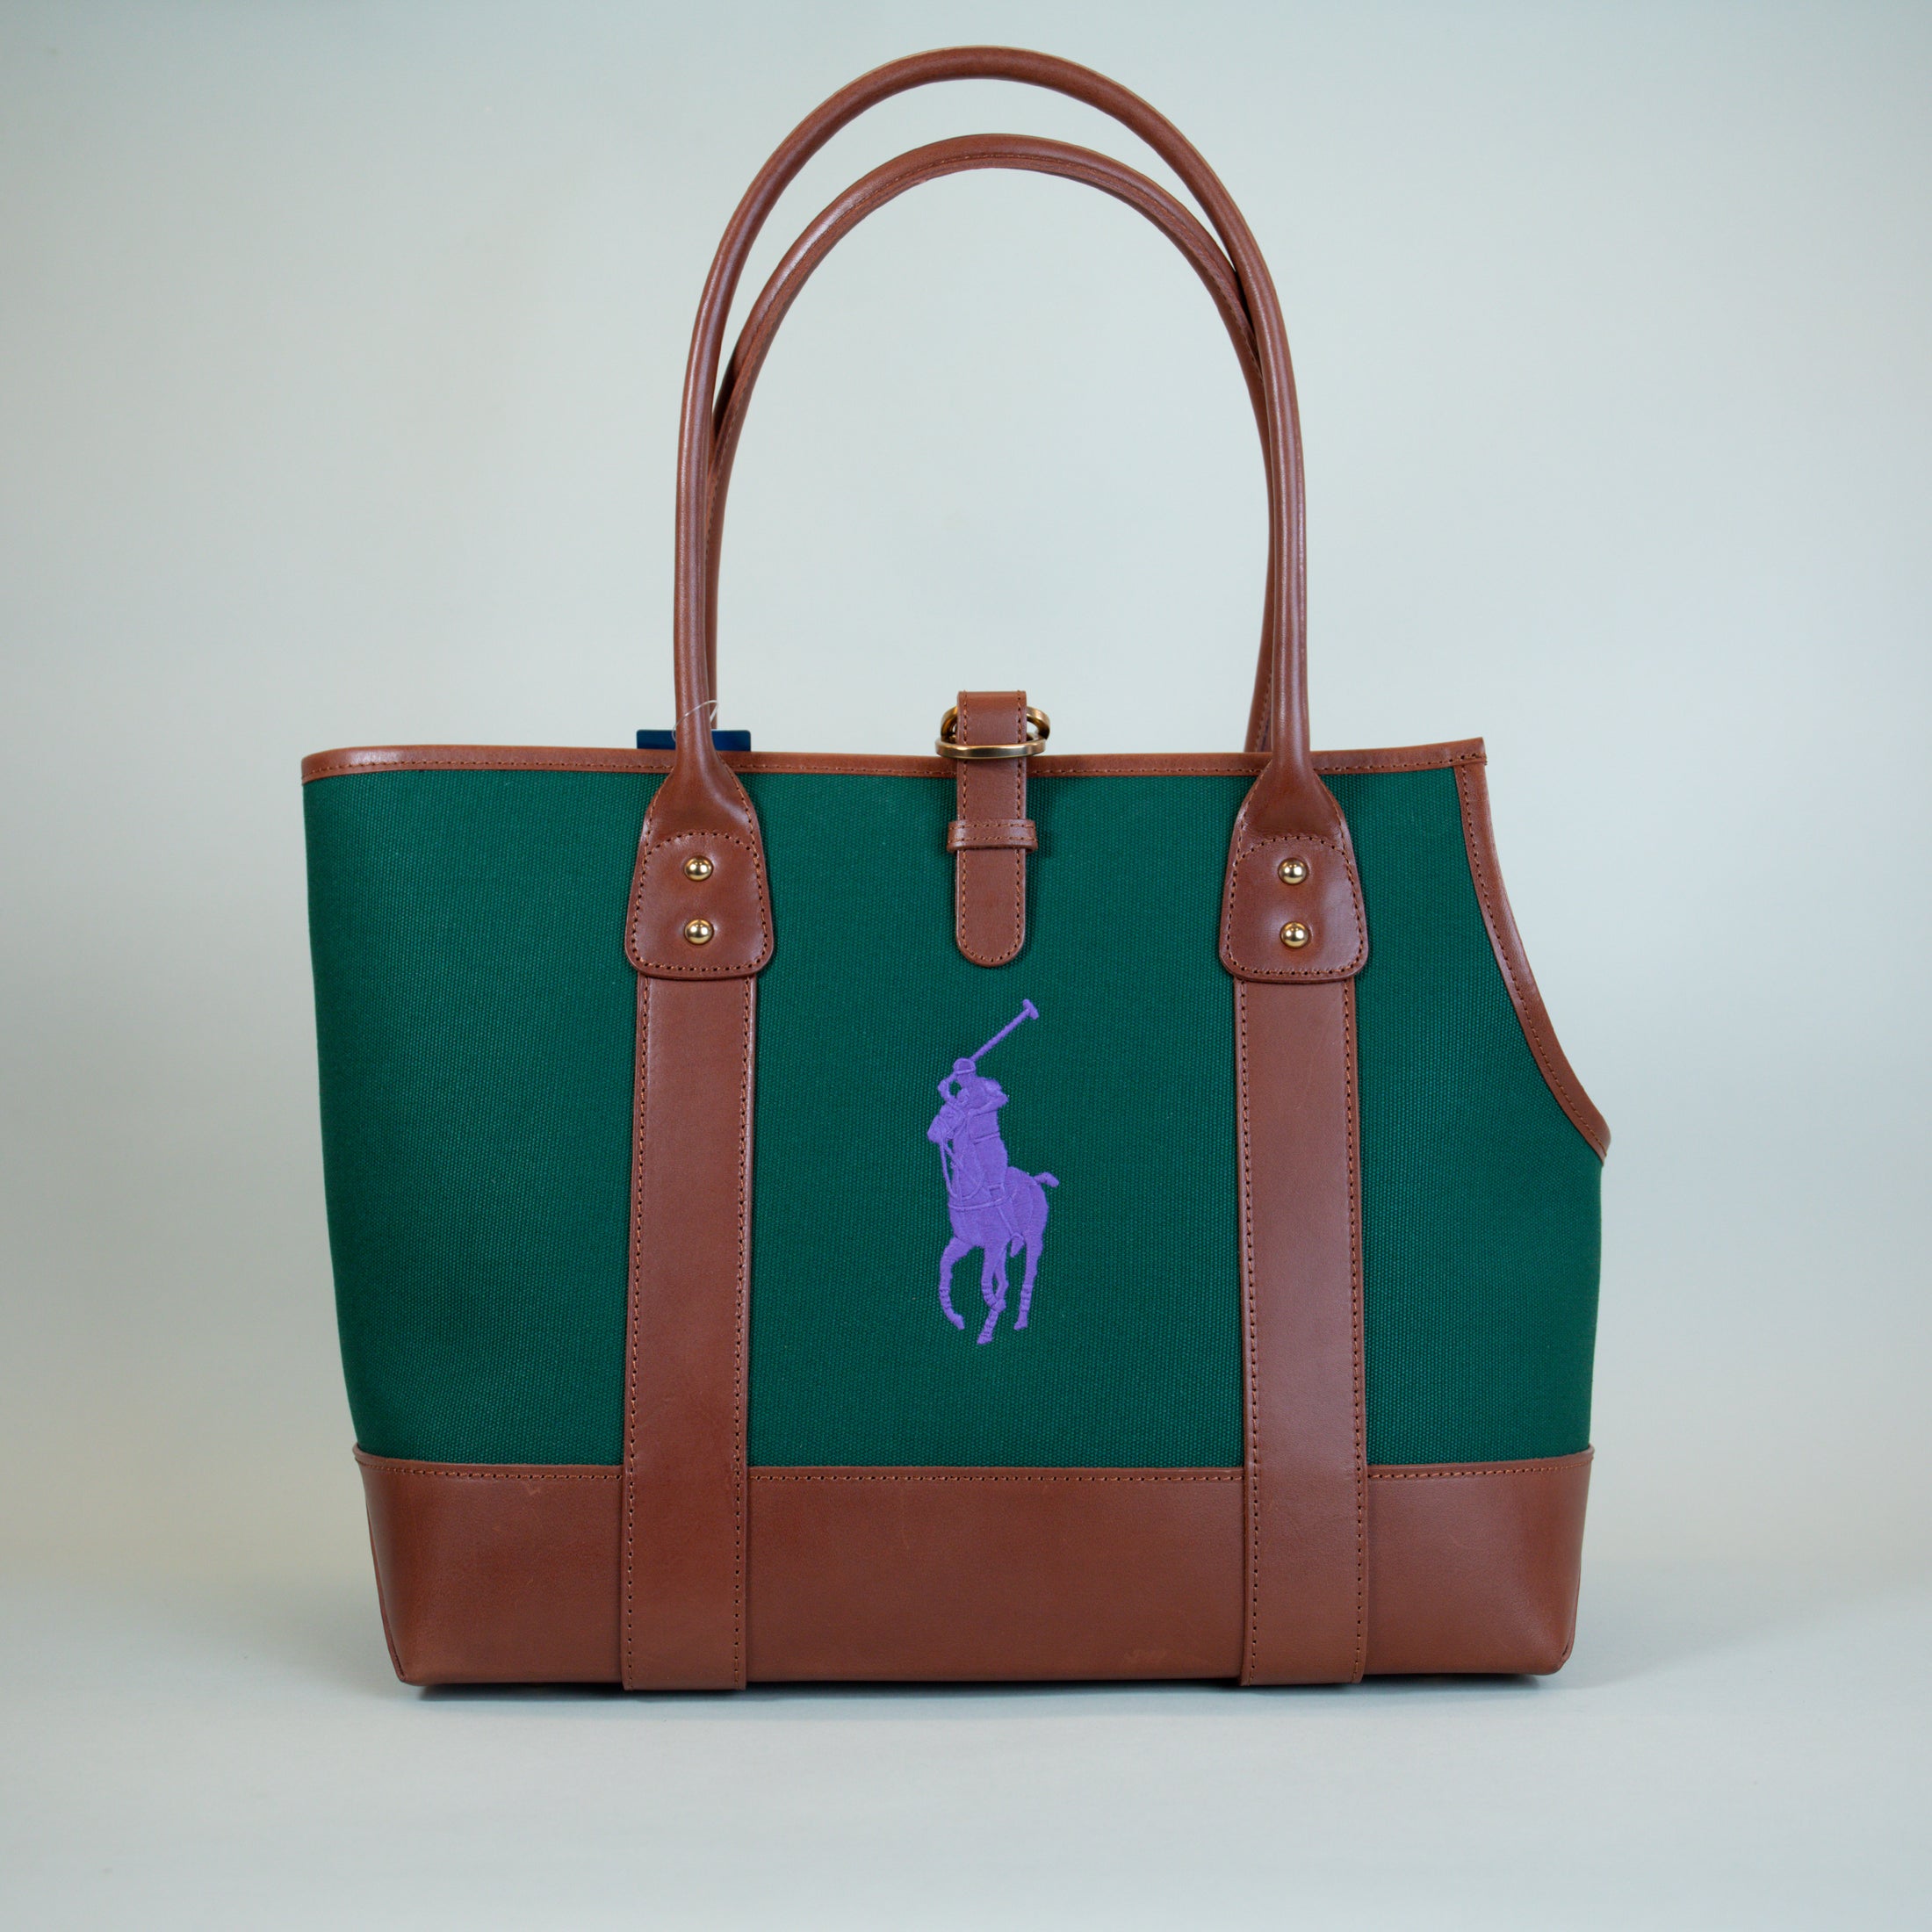 Ralph Lauren Leather & Canvas Polo Tote